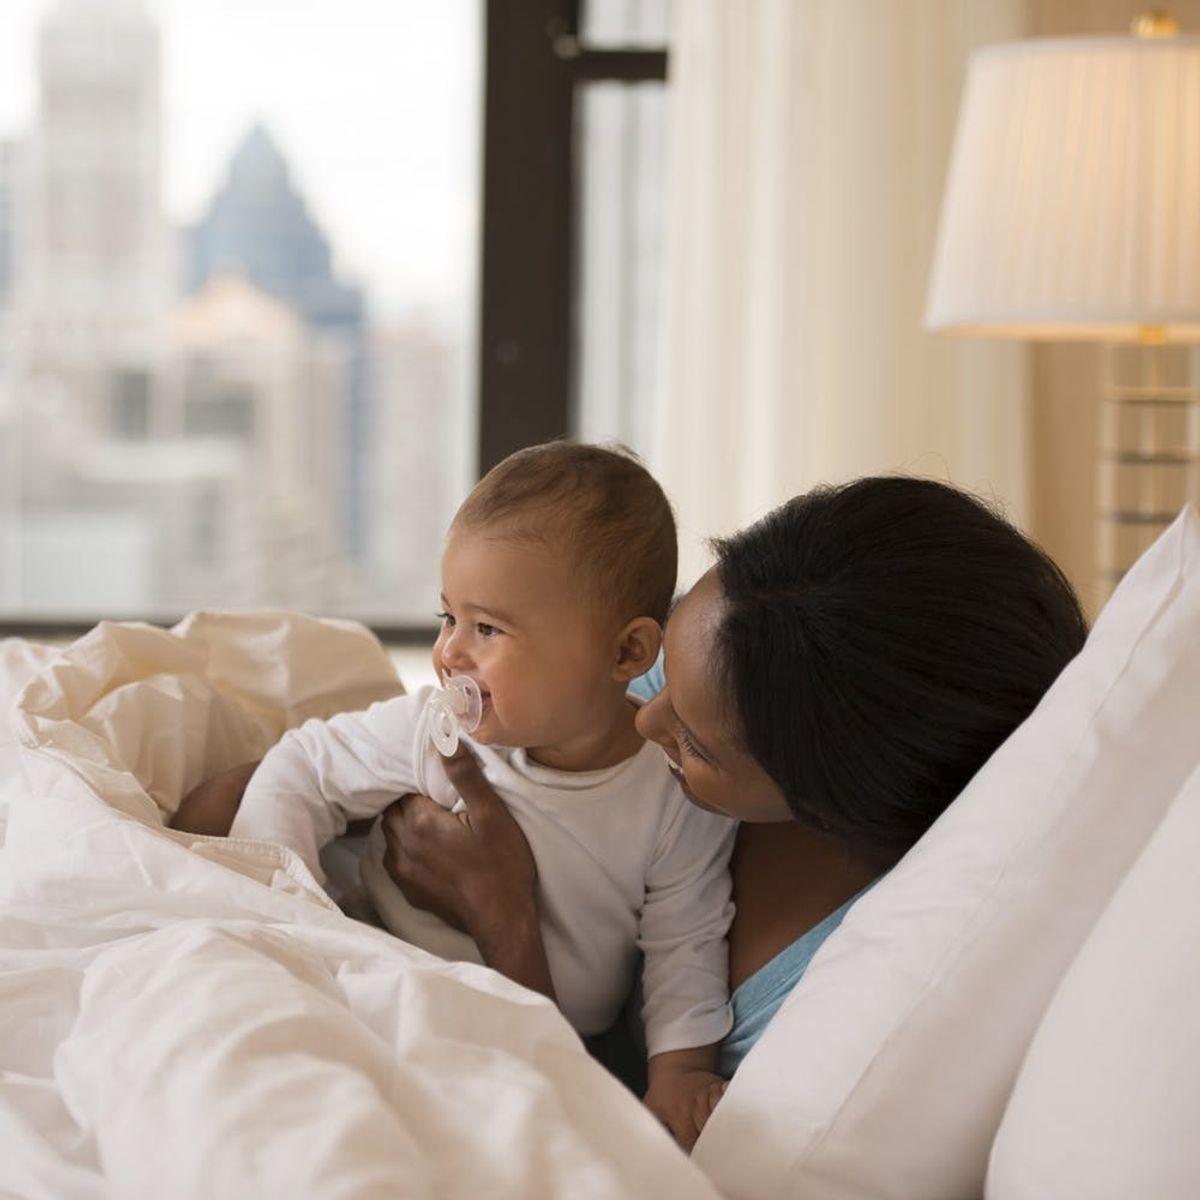 5 Ways to Make Baby’s Bedtime Easier on Vacation